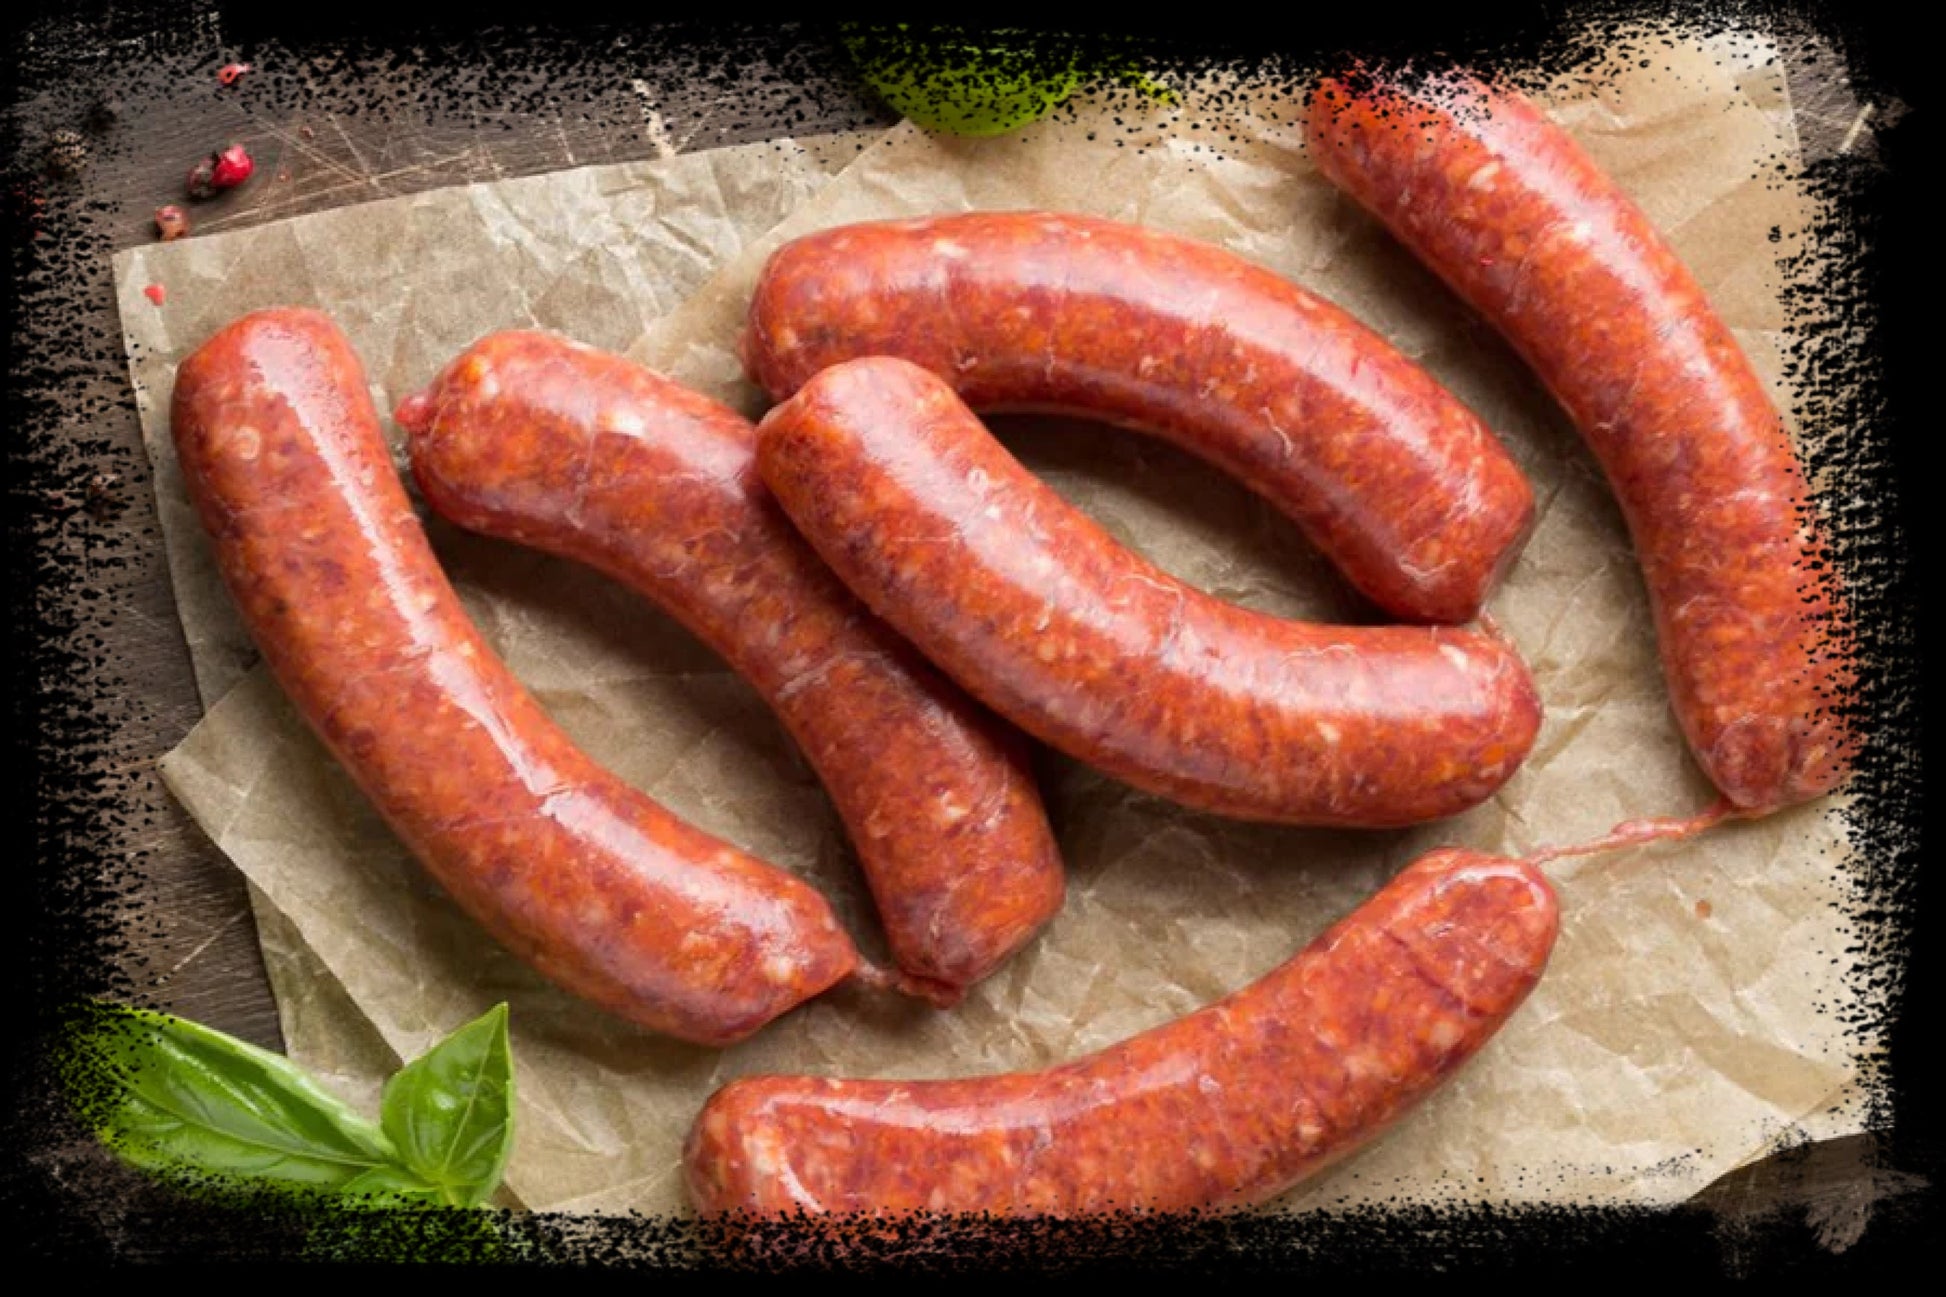 Fresh Grass-Fed Beef Sausage, Australia (Dhs 57.90/kg) - Chilled